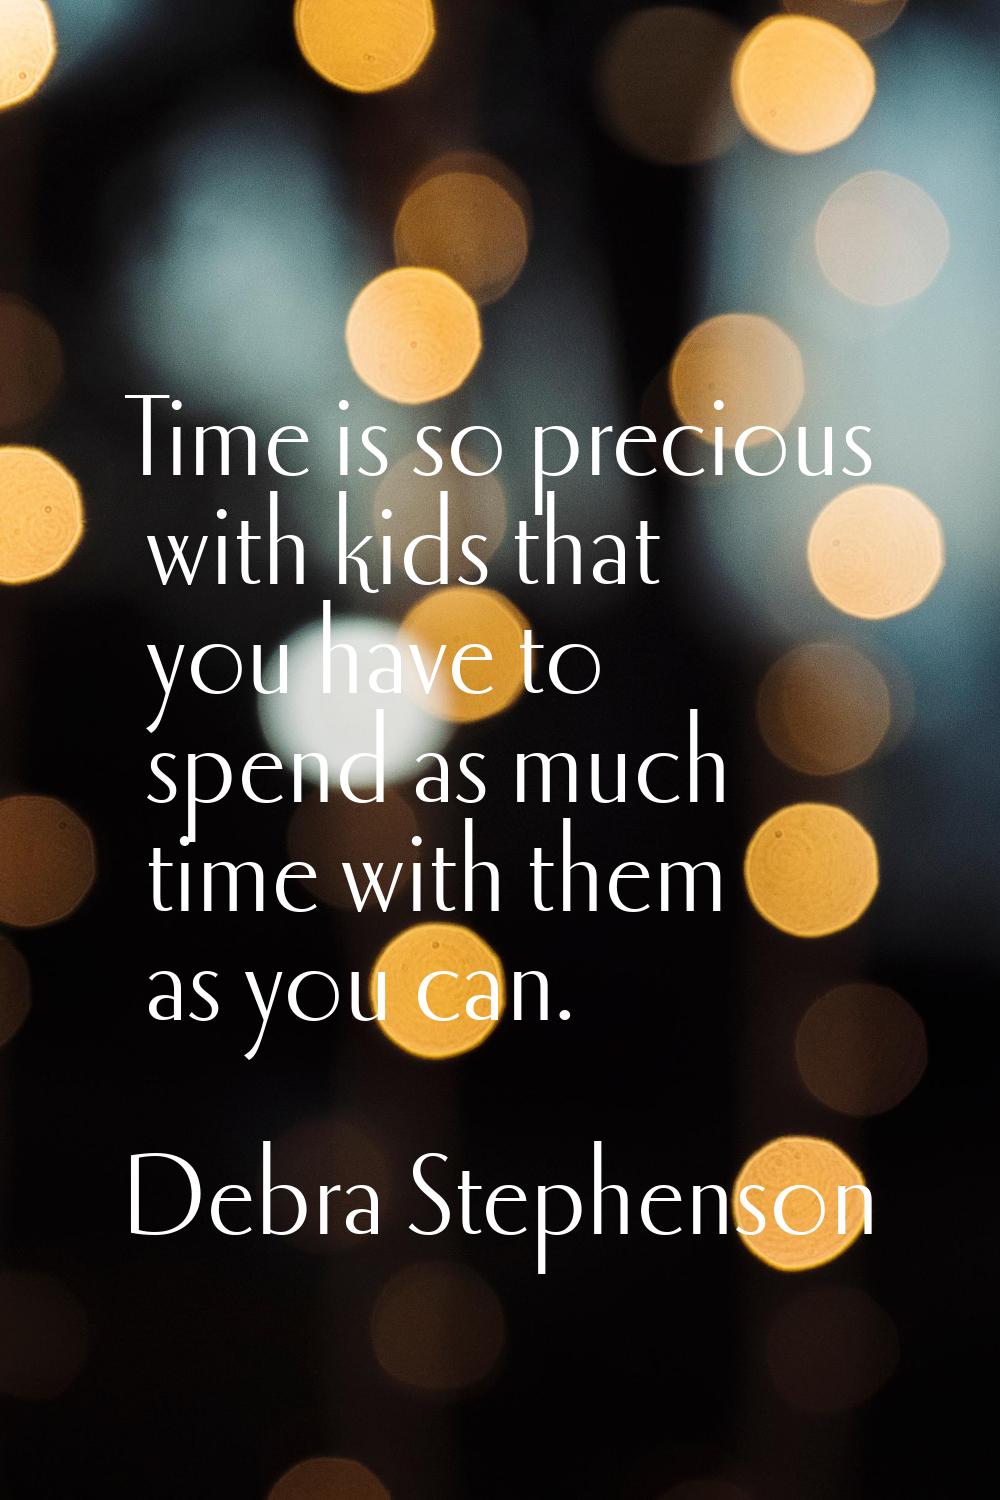 Time is so precious with kids that you have to spend as much time with them as you can.